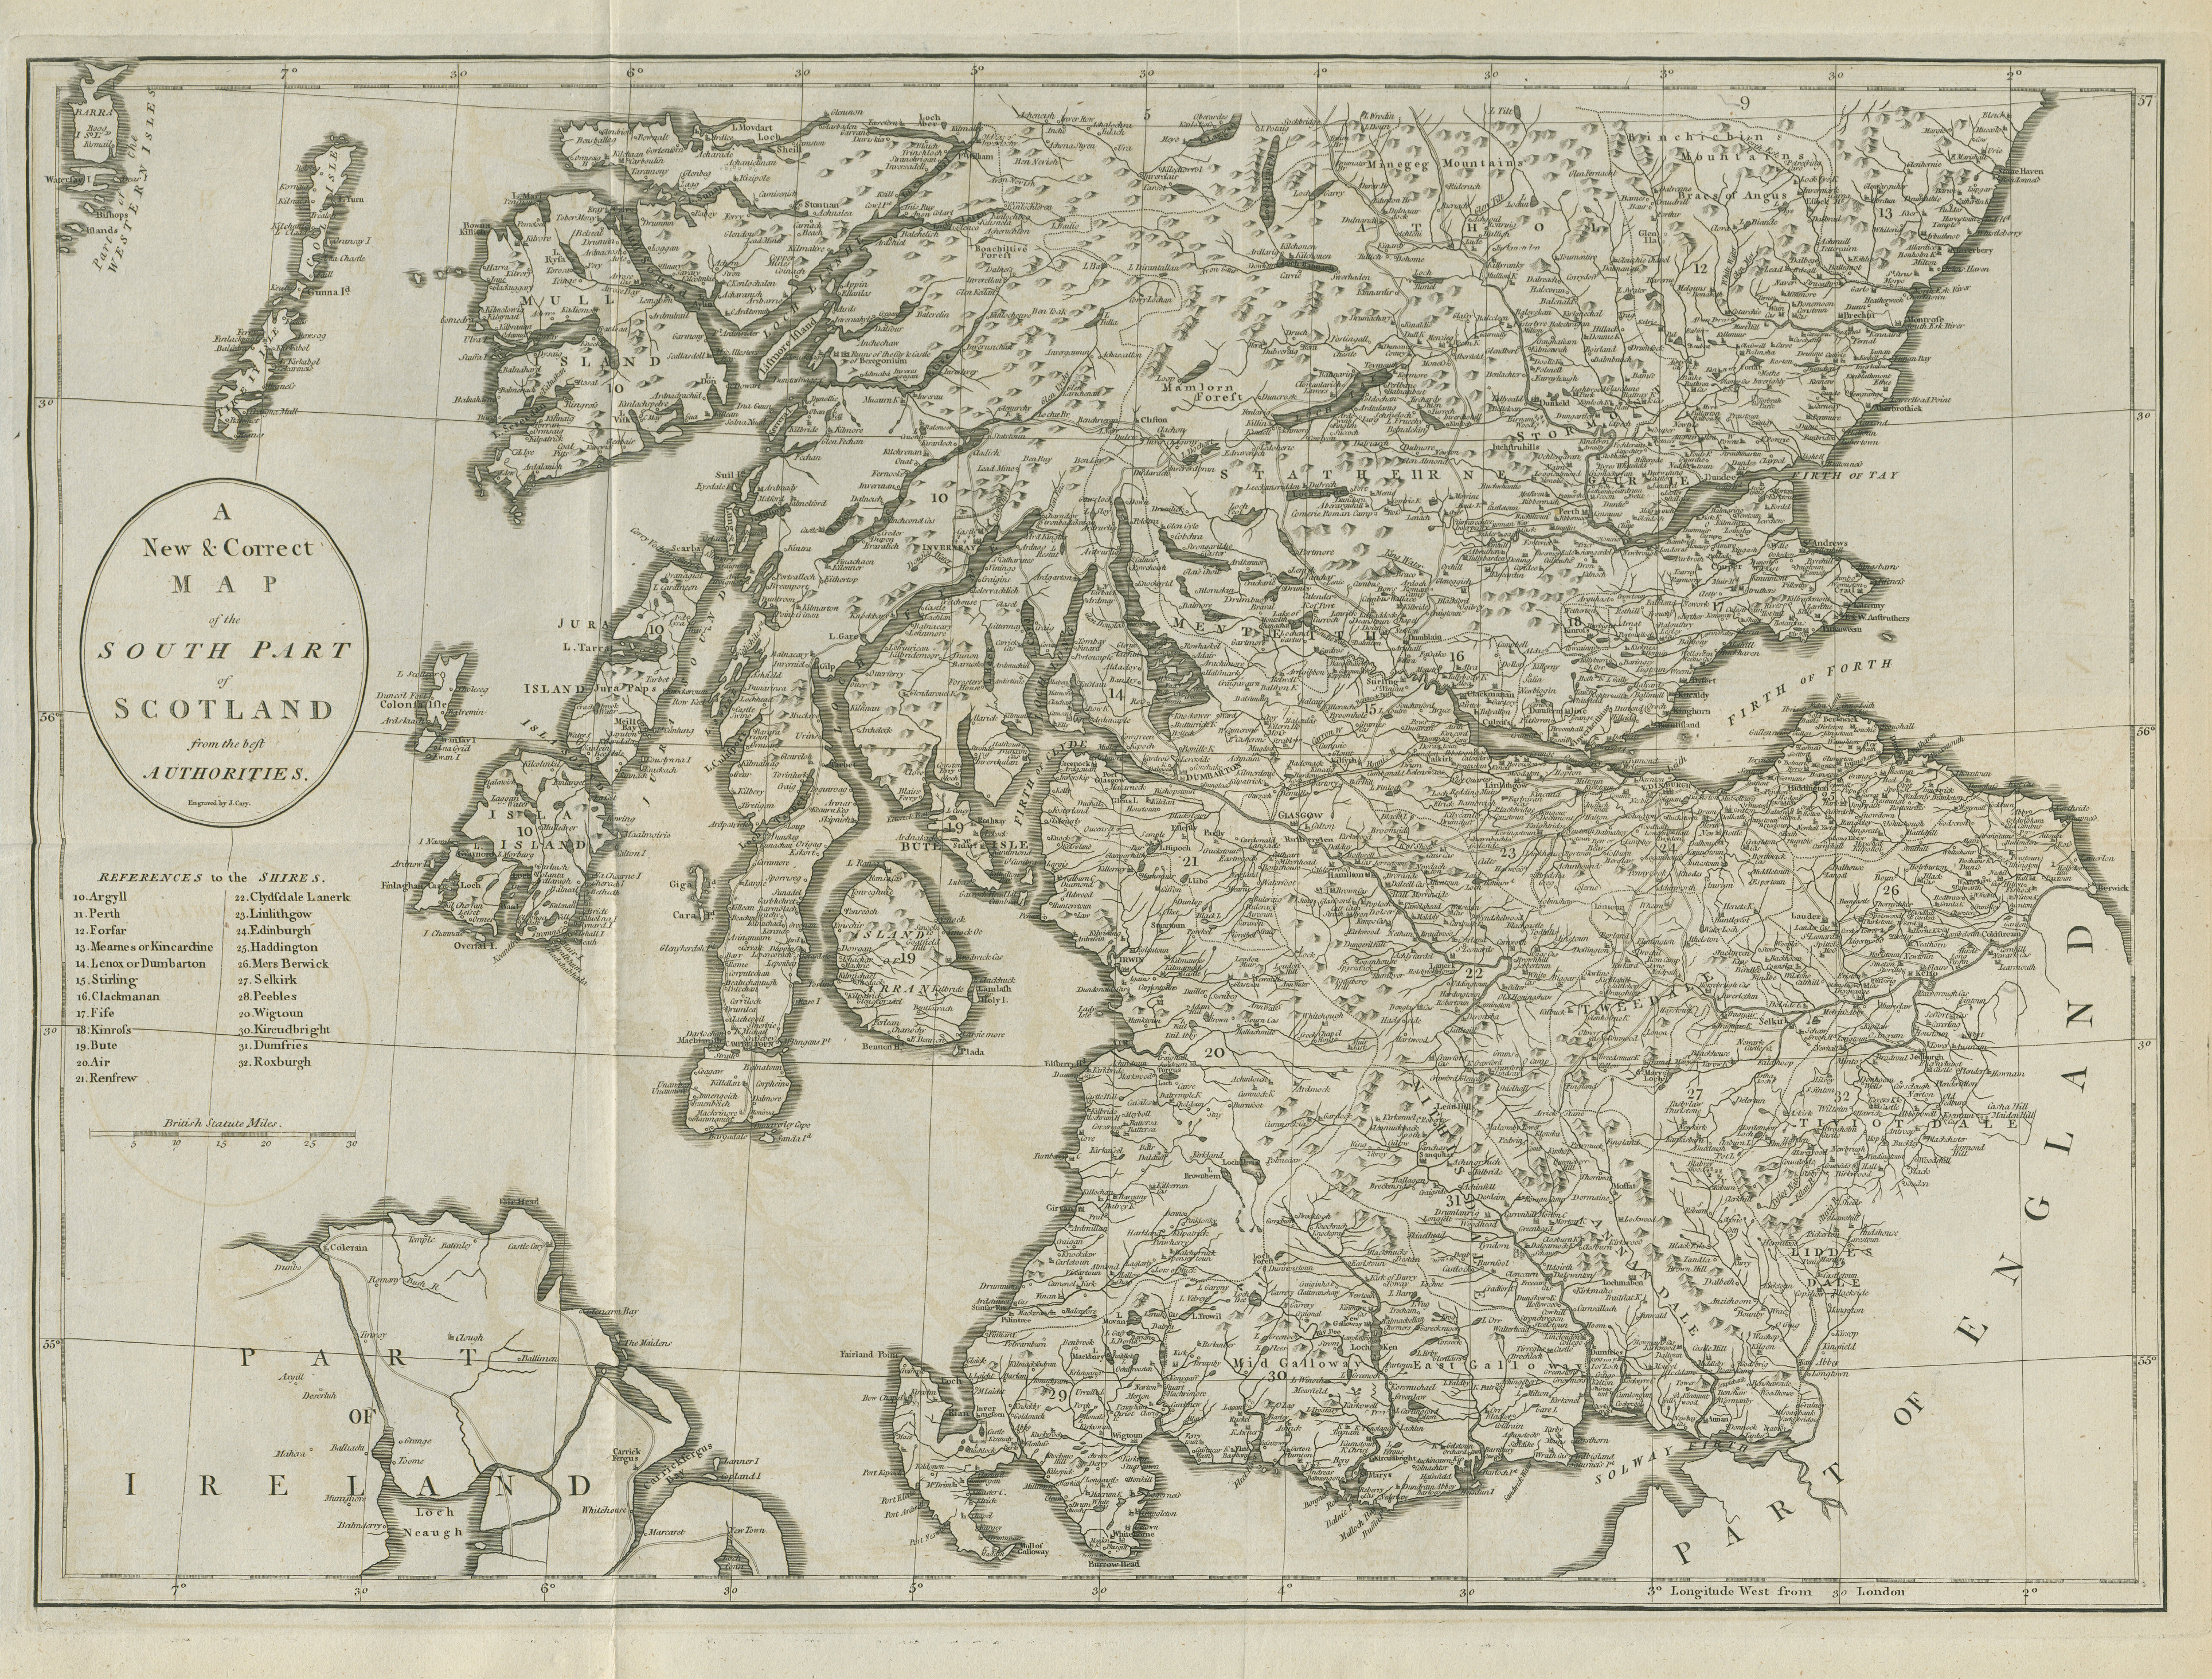 "A new & correct map of the South part of Scotland…" by John CARY 1789 old